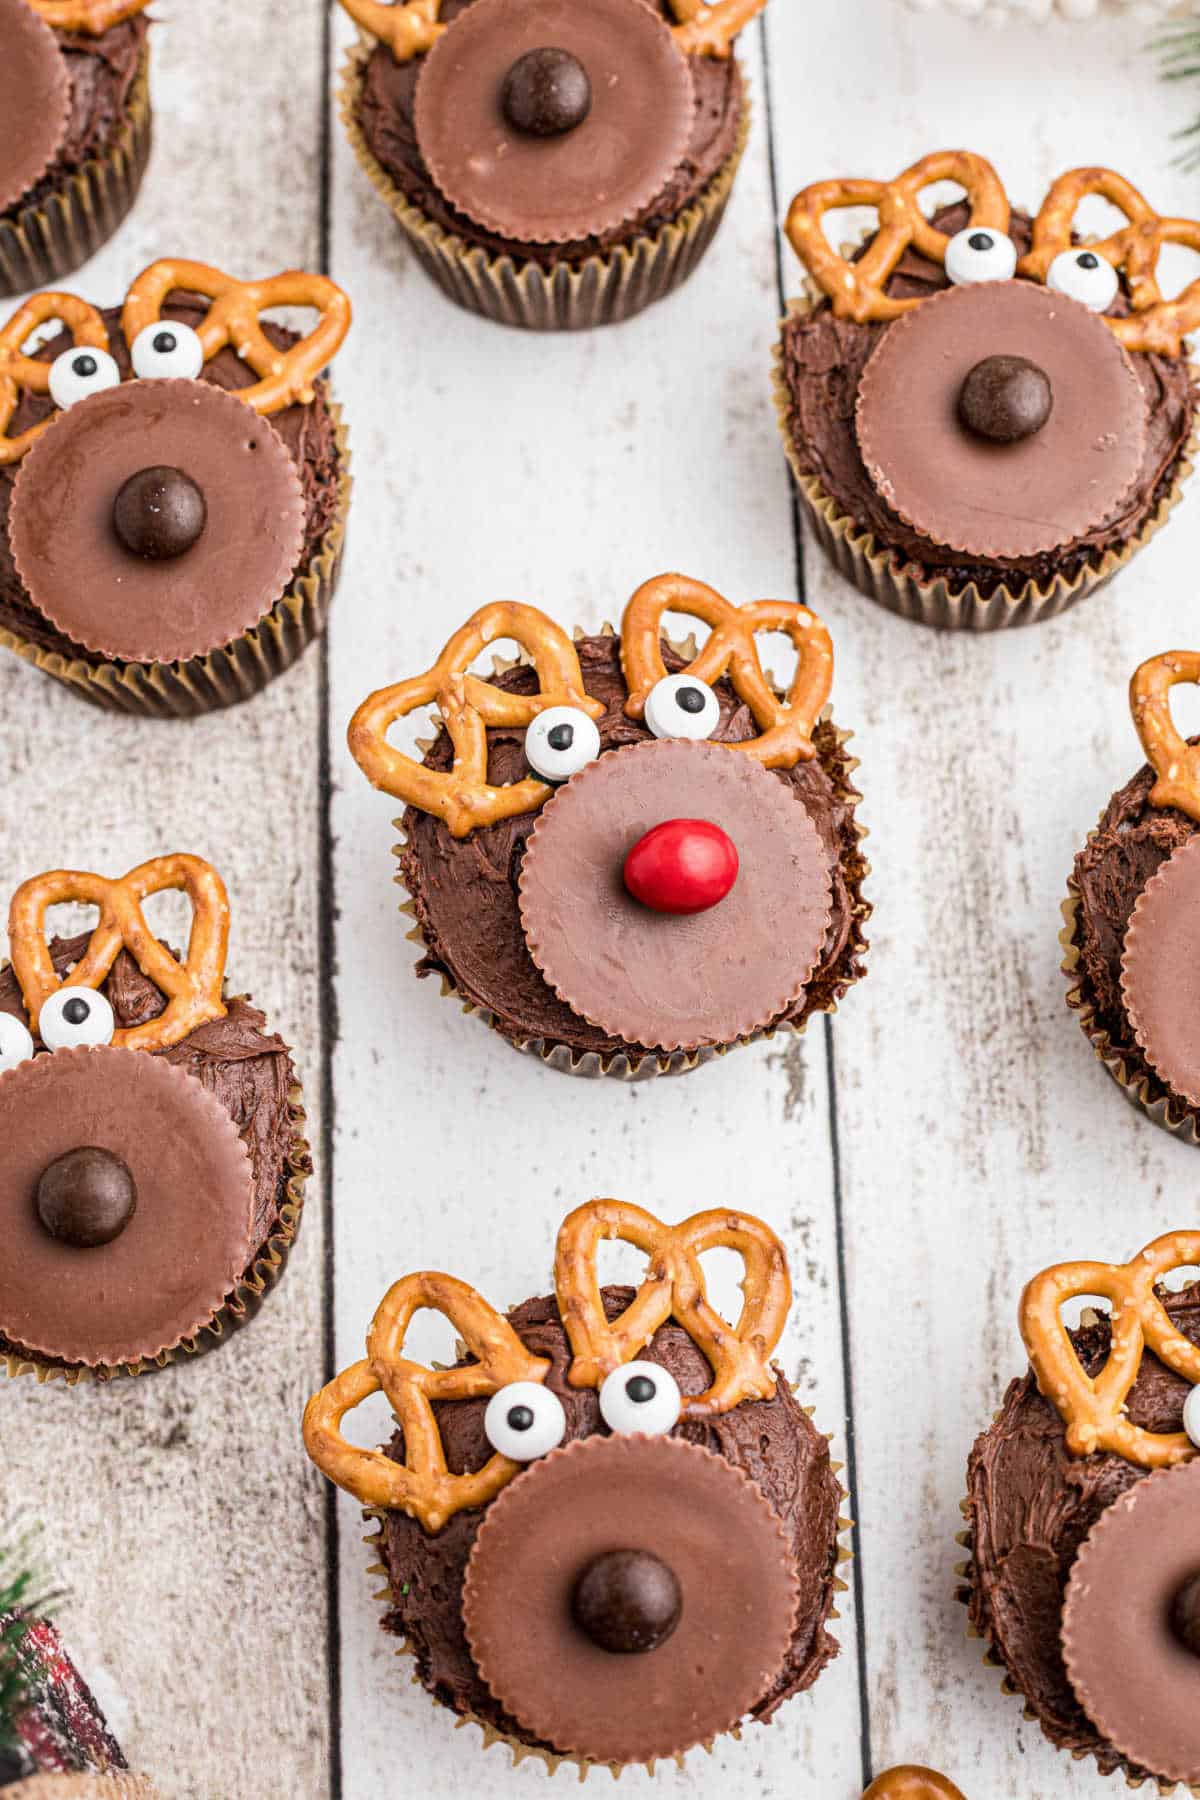 Side view of a lot of reindeer cupcakes with Rudolph in the middle with his red nose.